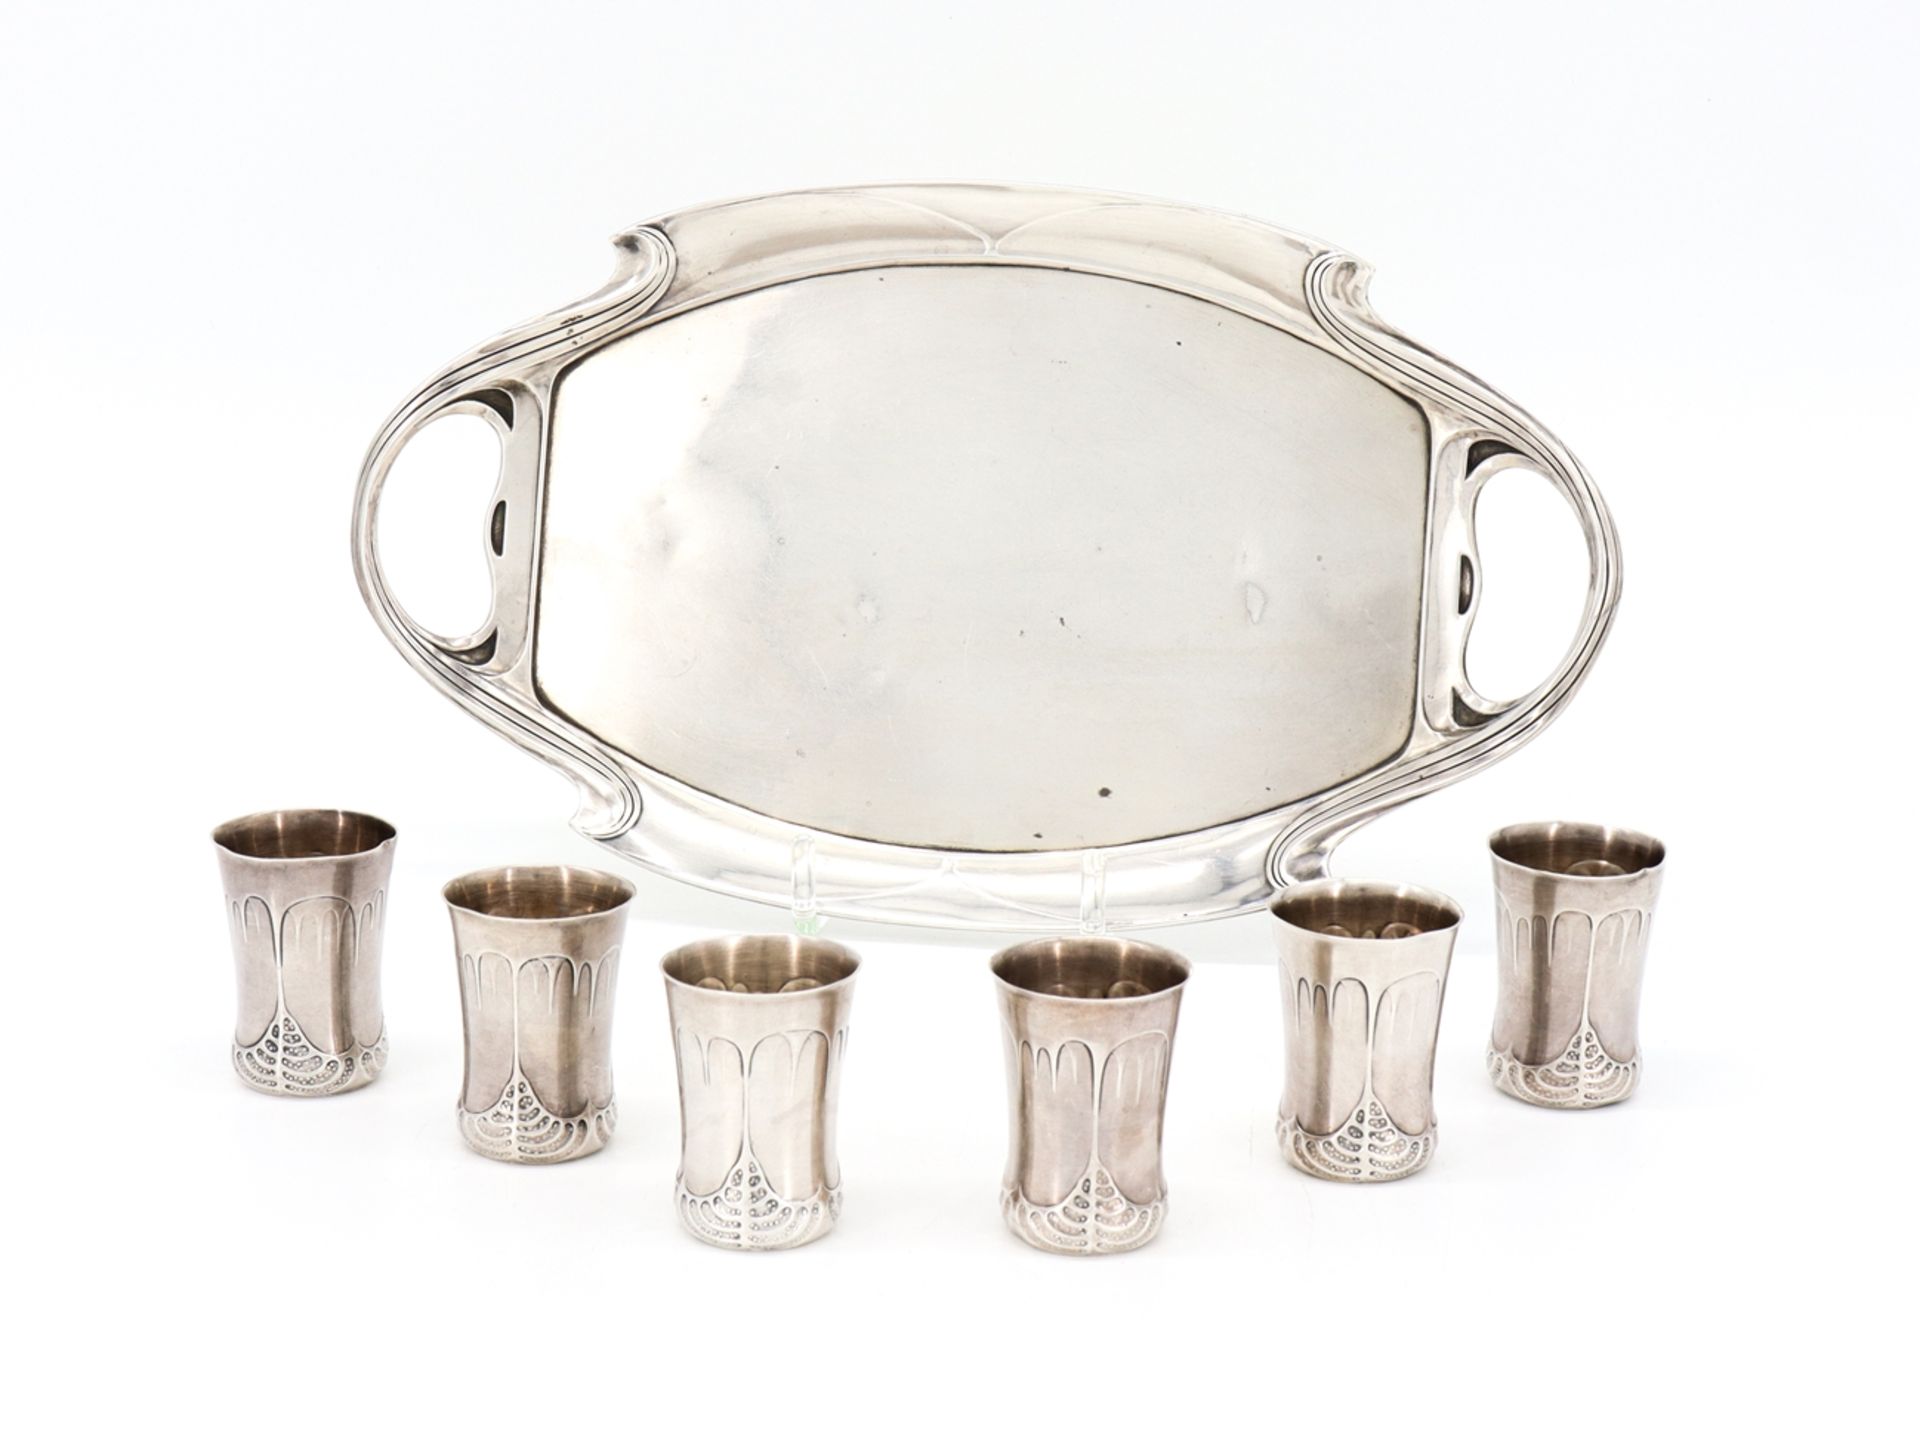 Art Nouveau tray in 925 sterling silver with 6 cups around 1900. - Image 2 of 7